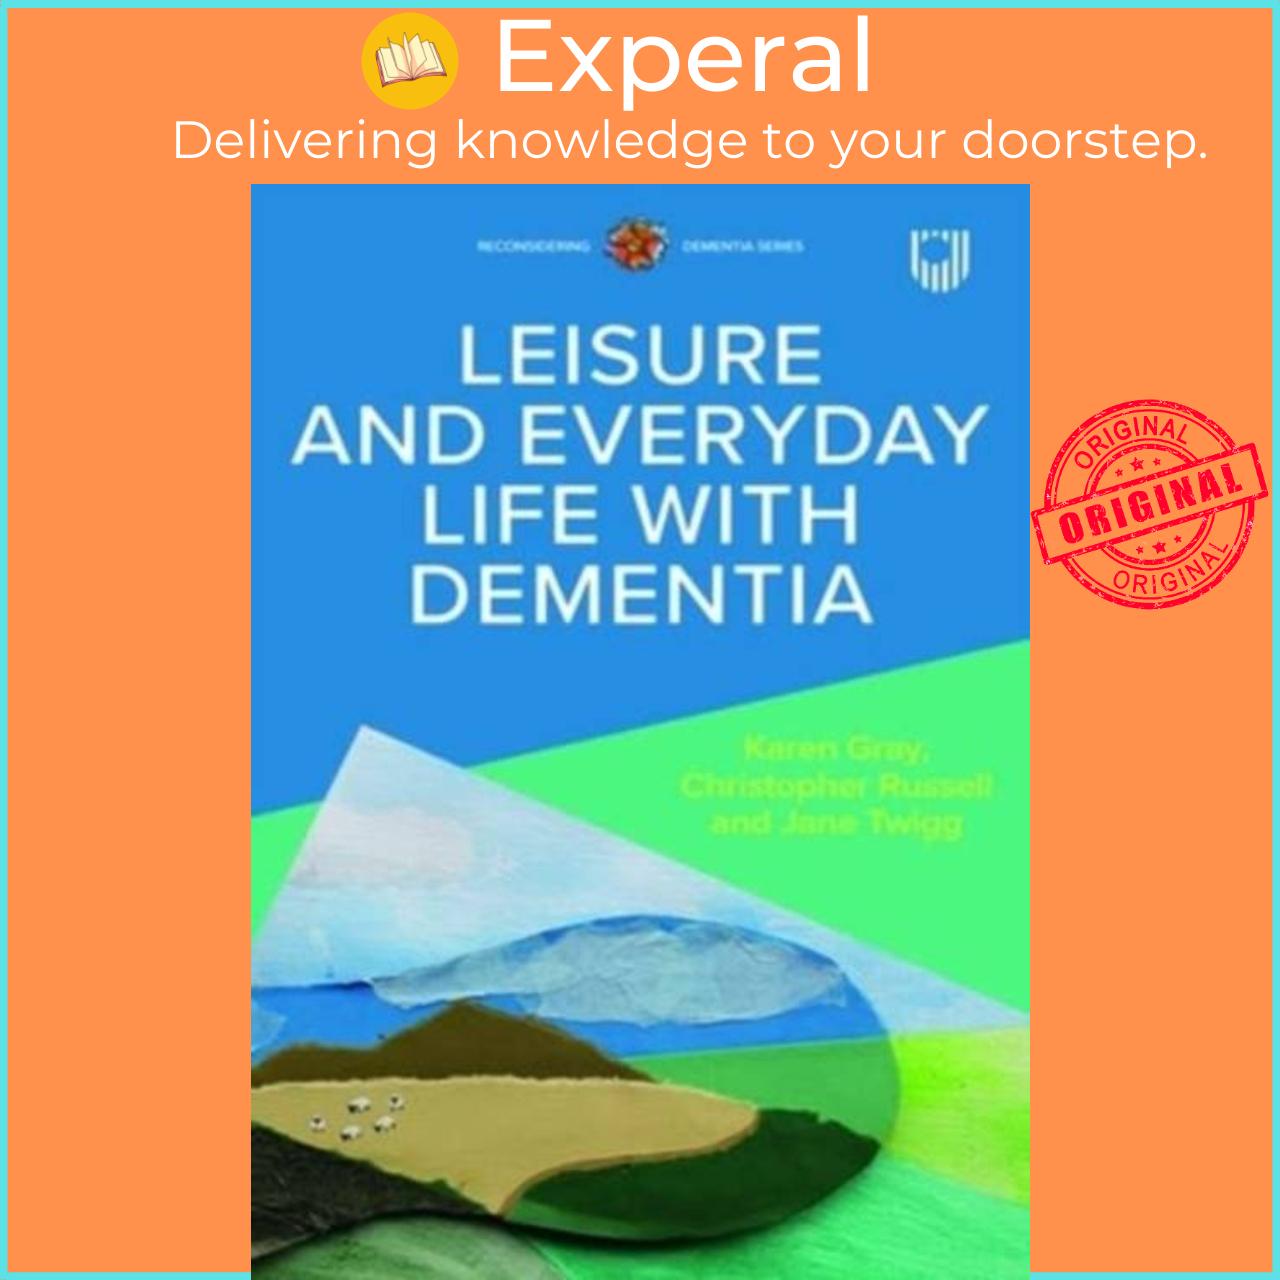 Sách - Leisure and Everyday Life with Dementia by Jane Twigg (UK edition, paperback)